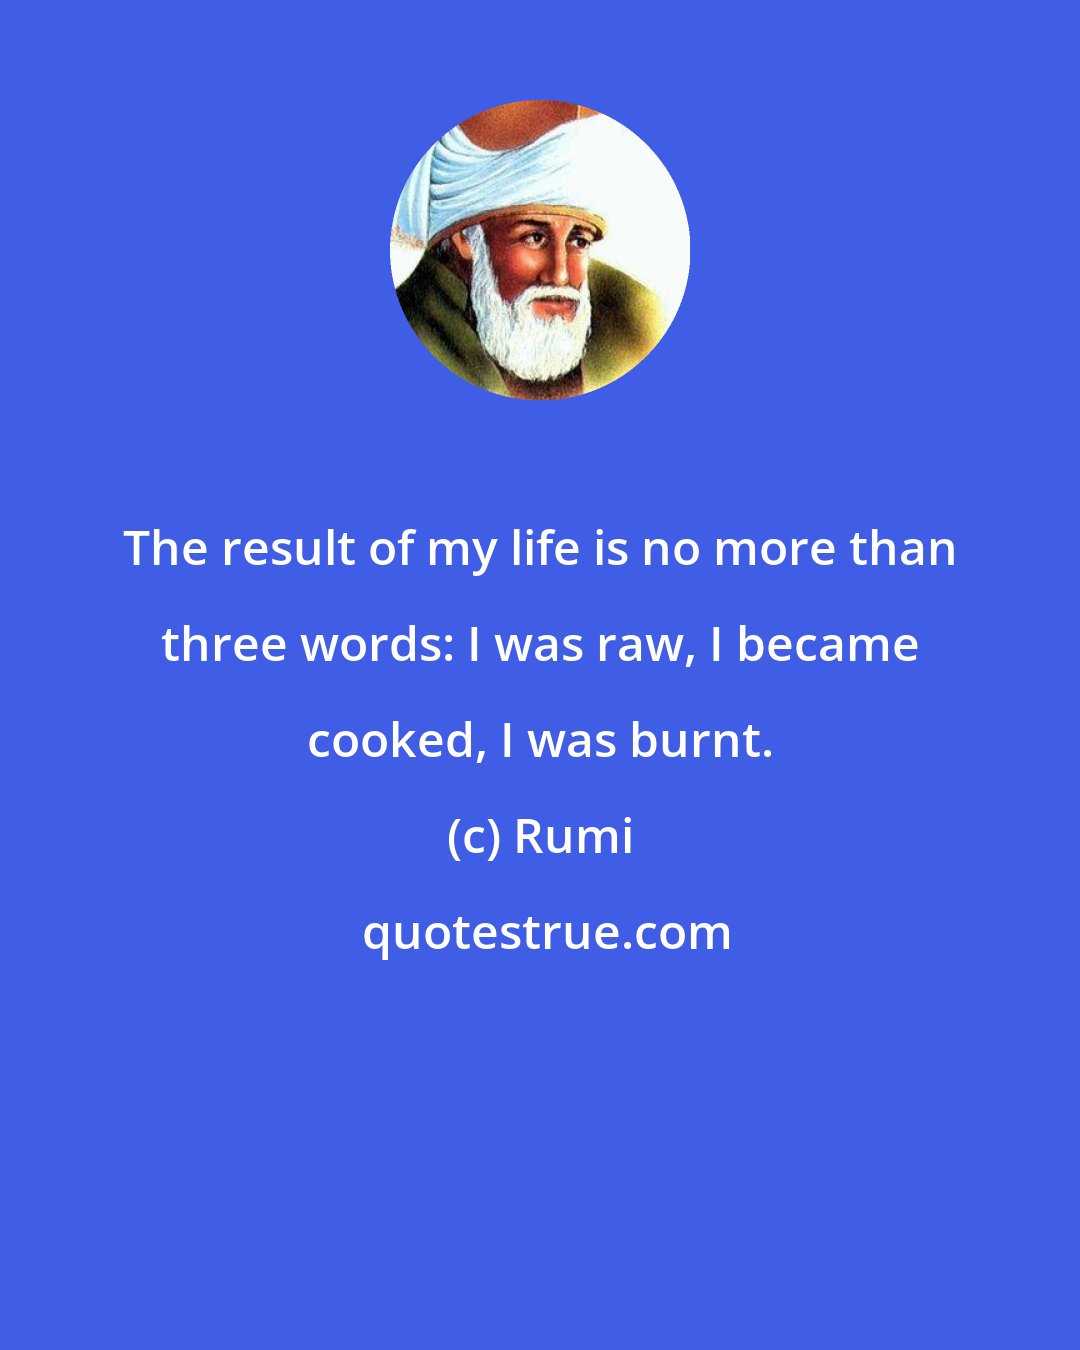 Rumi: The result of my life is no more than three words: I was raw, I became cooked, I was burnt.